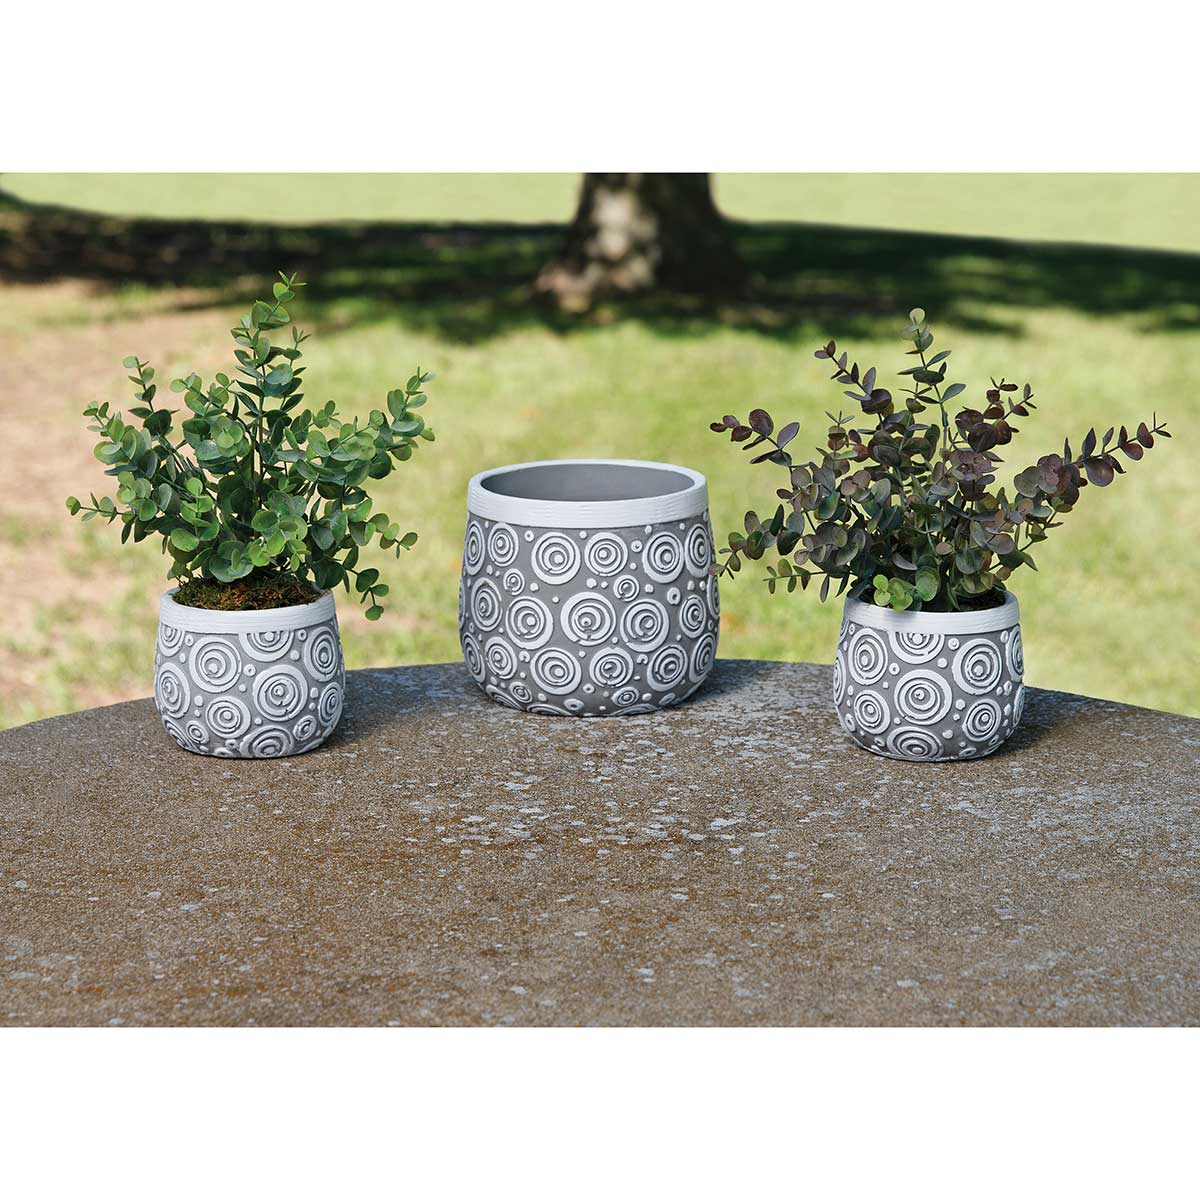 POT SWIRL ROUND GREY LARGE 7IN X 6IN WHITE CONCRETE - Click Image to Close